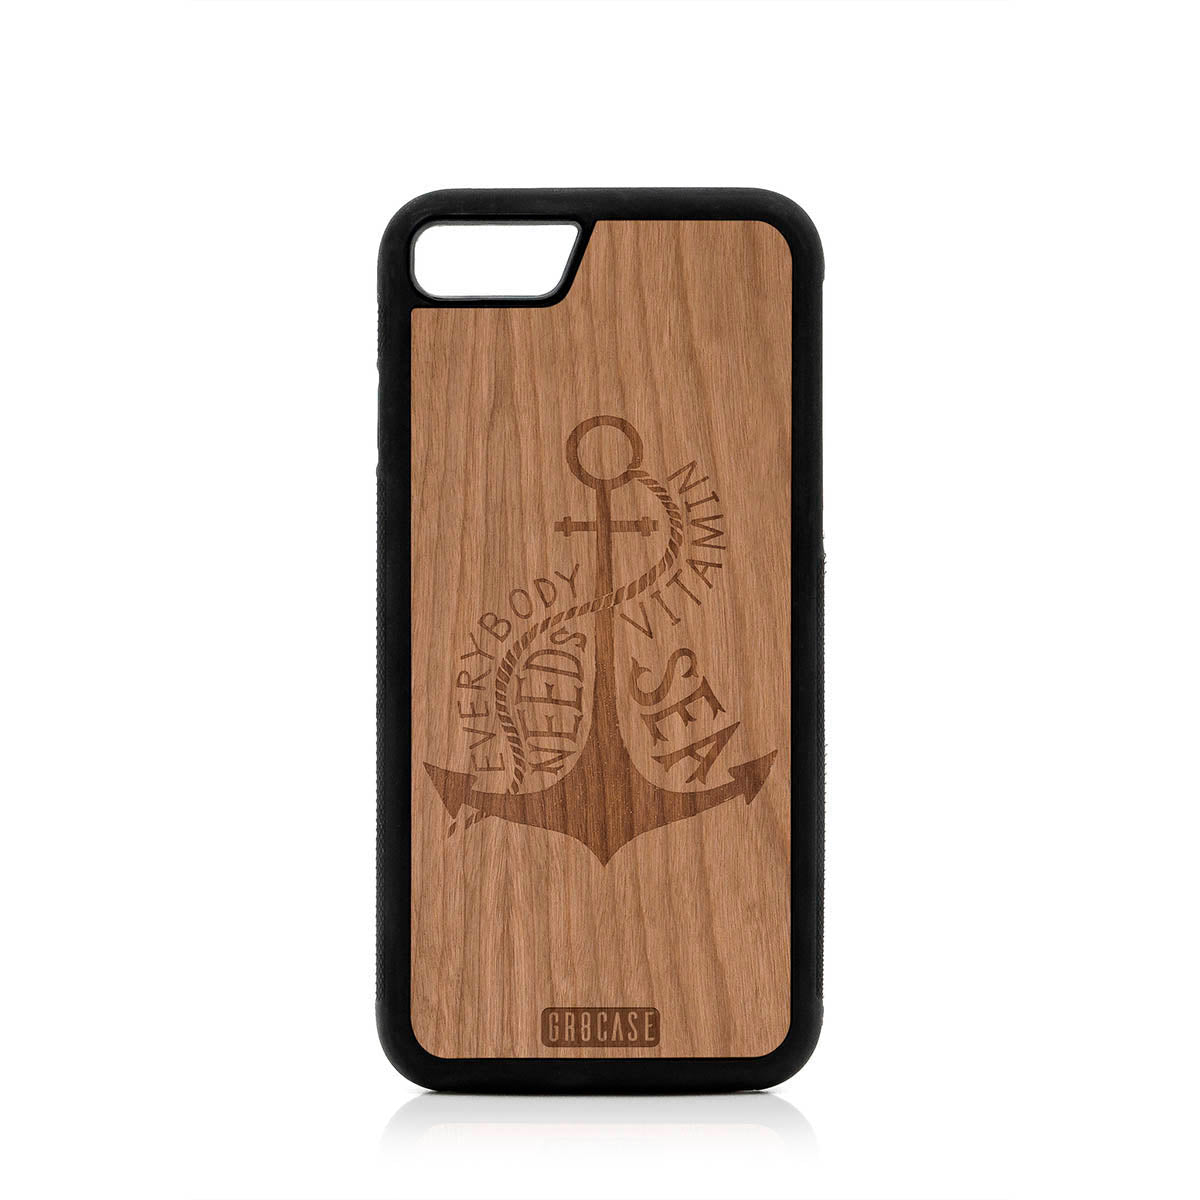 Everybody Needs Vitamin Sea (Anchor) Design Wood Case For iPhone SE 2020 by GR8CASE